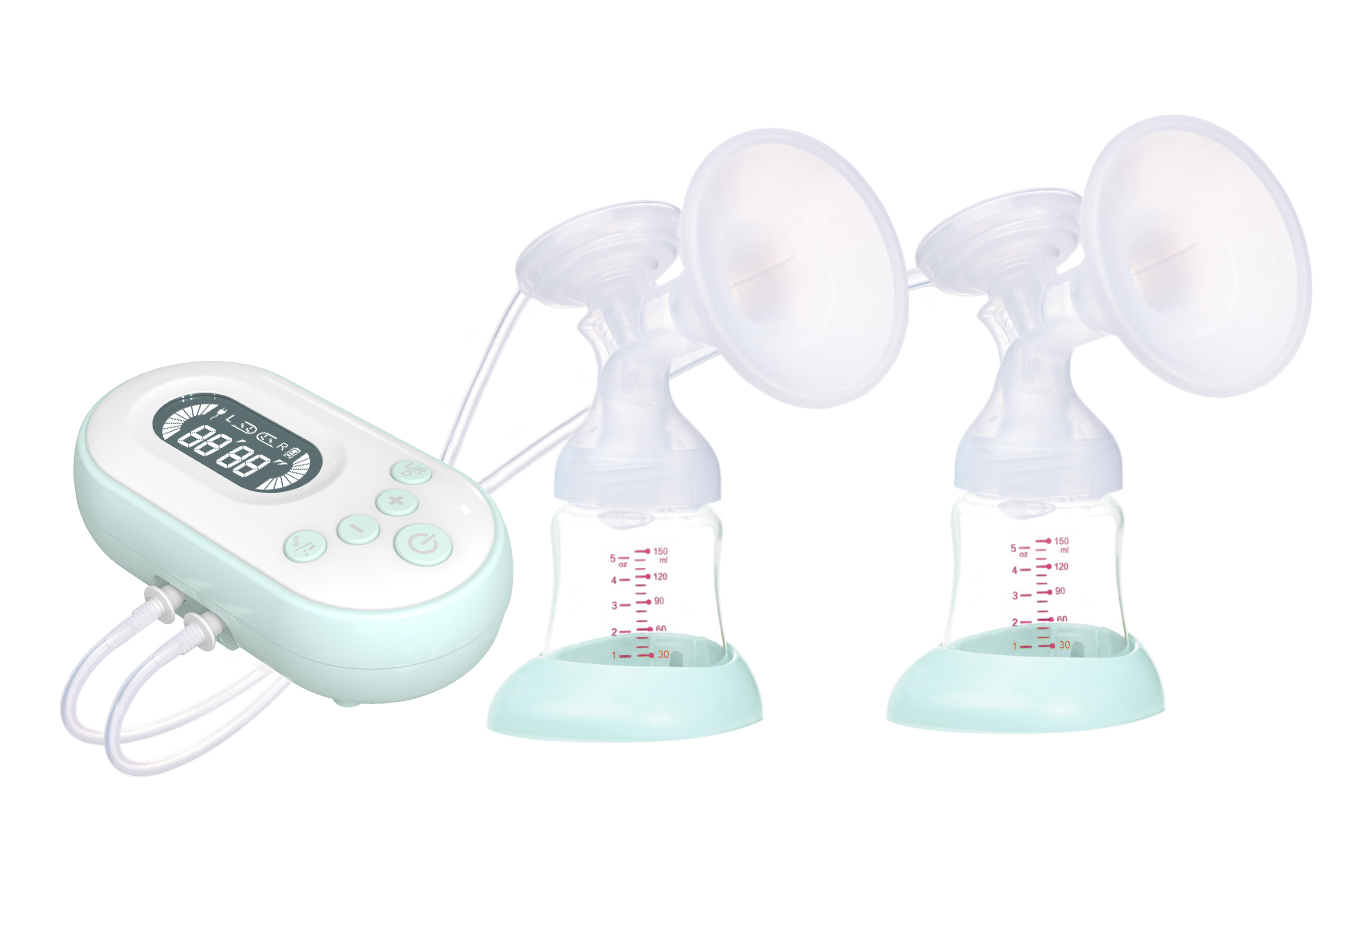 Is It Painful To Use a Breast Pump?